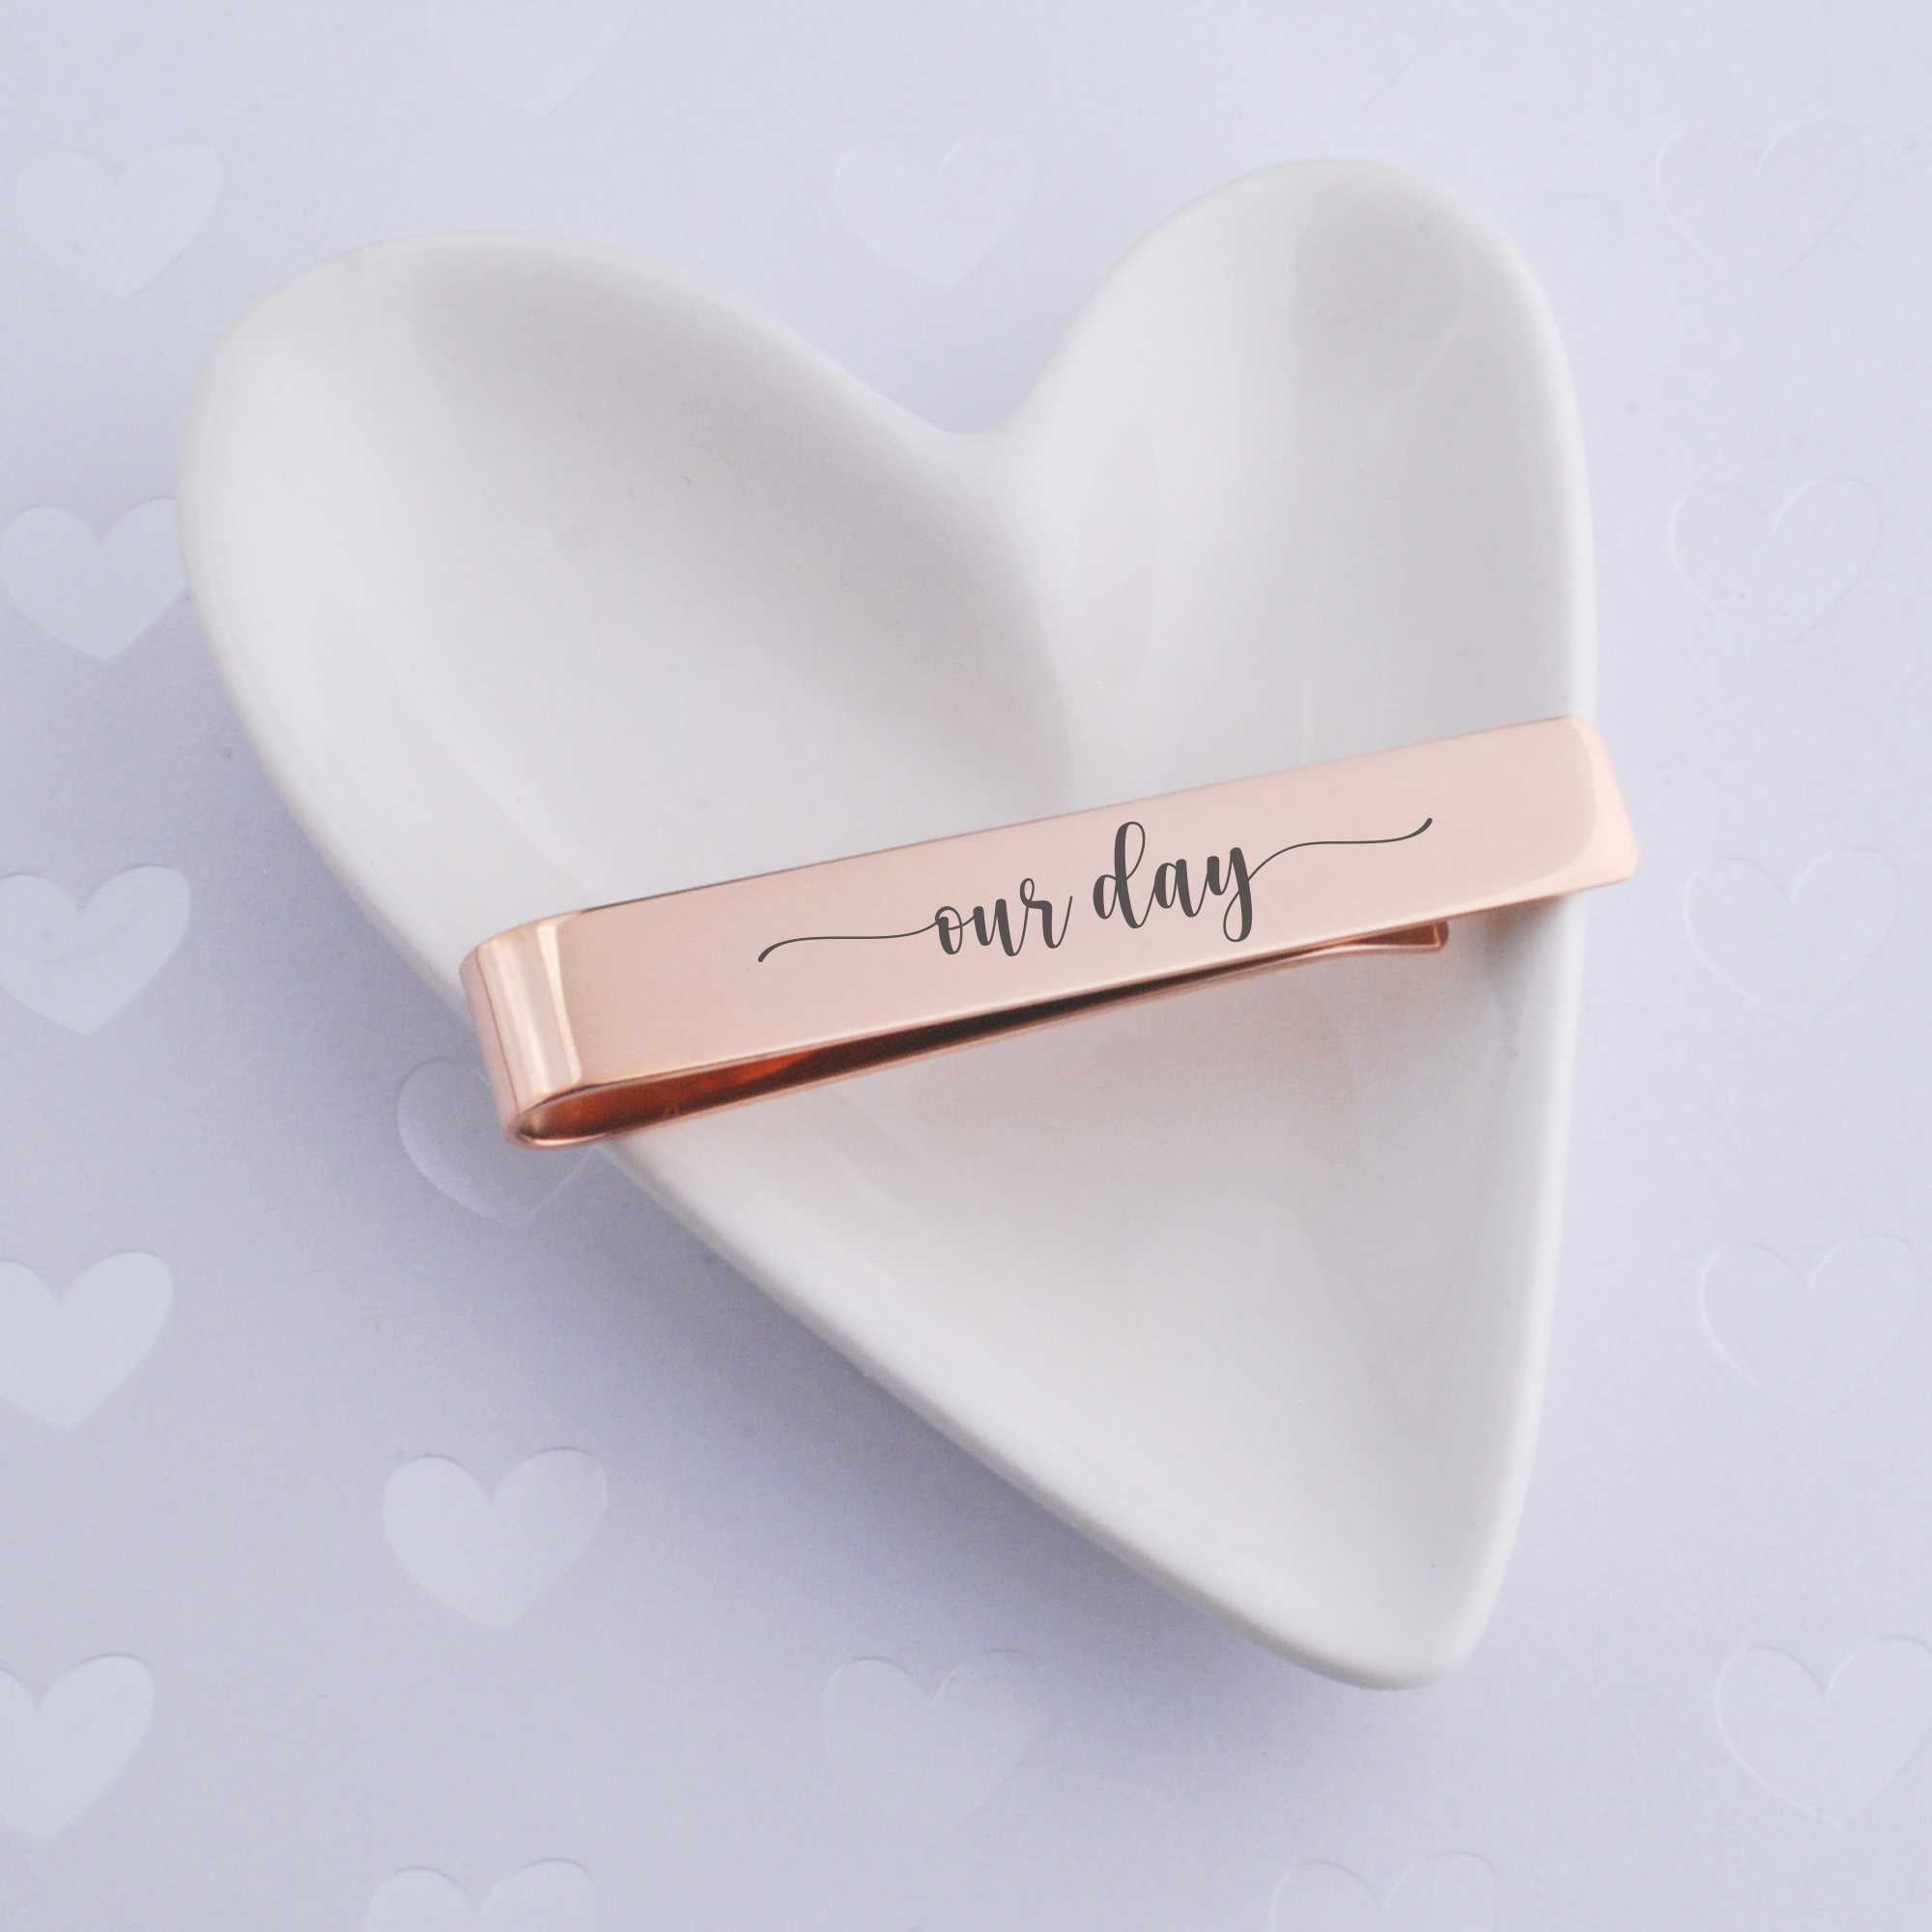 Our Day - Tie Clip